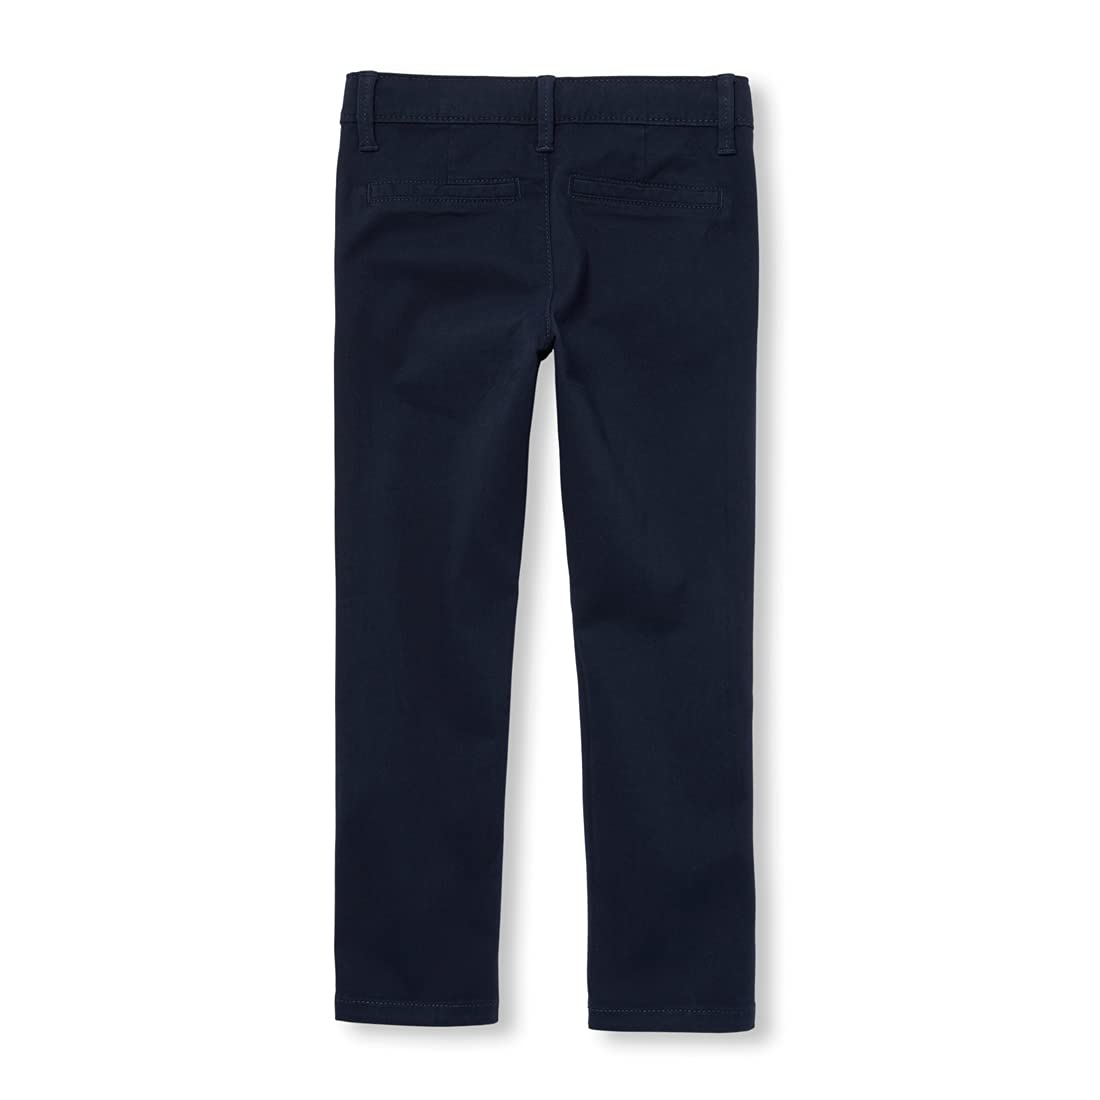 The Children's Place Girl's Skinny Chino Pants